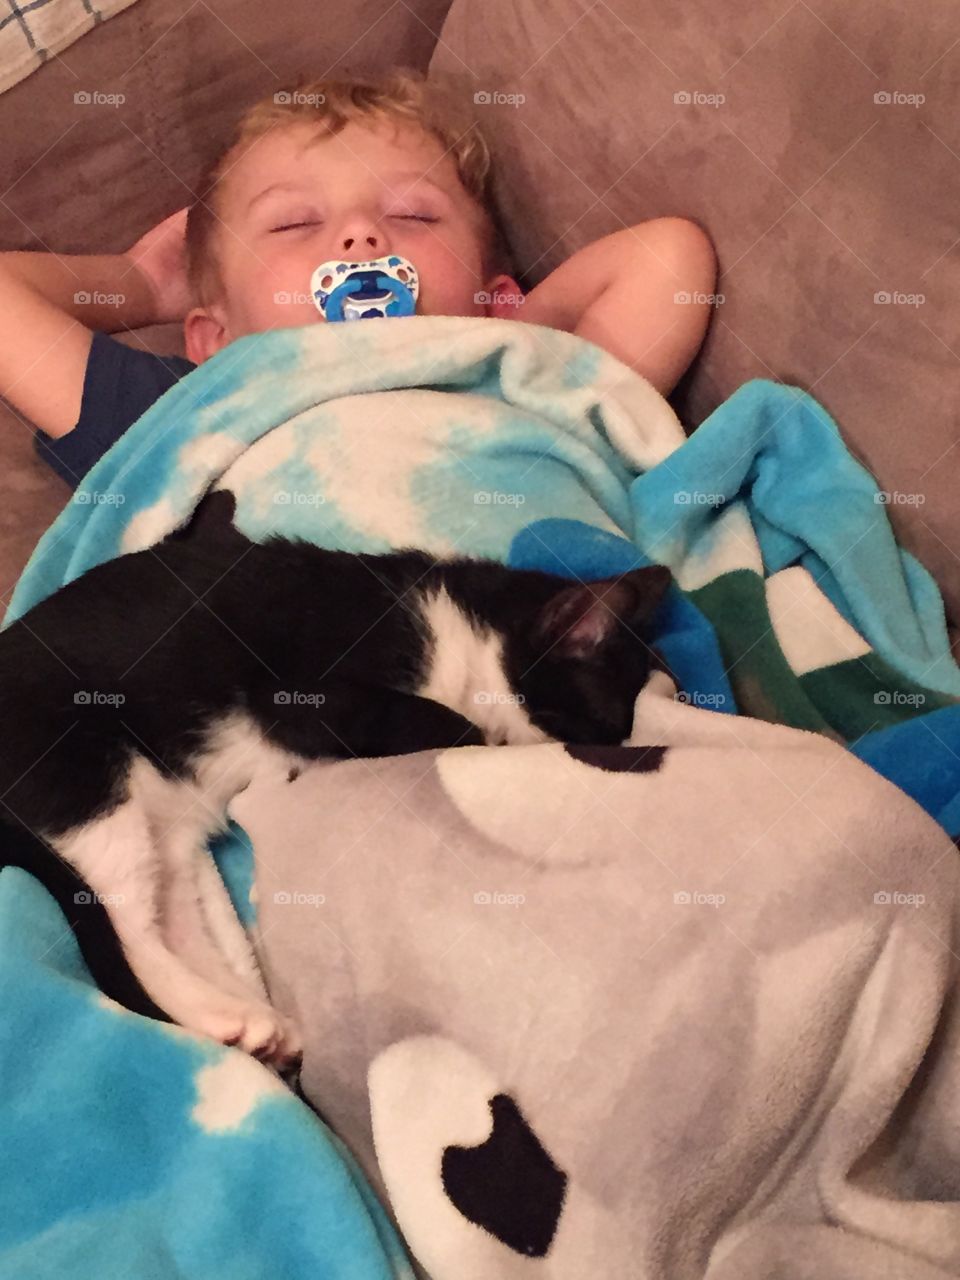 My nephew and our new kitten taking a nap together.